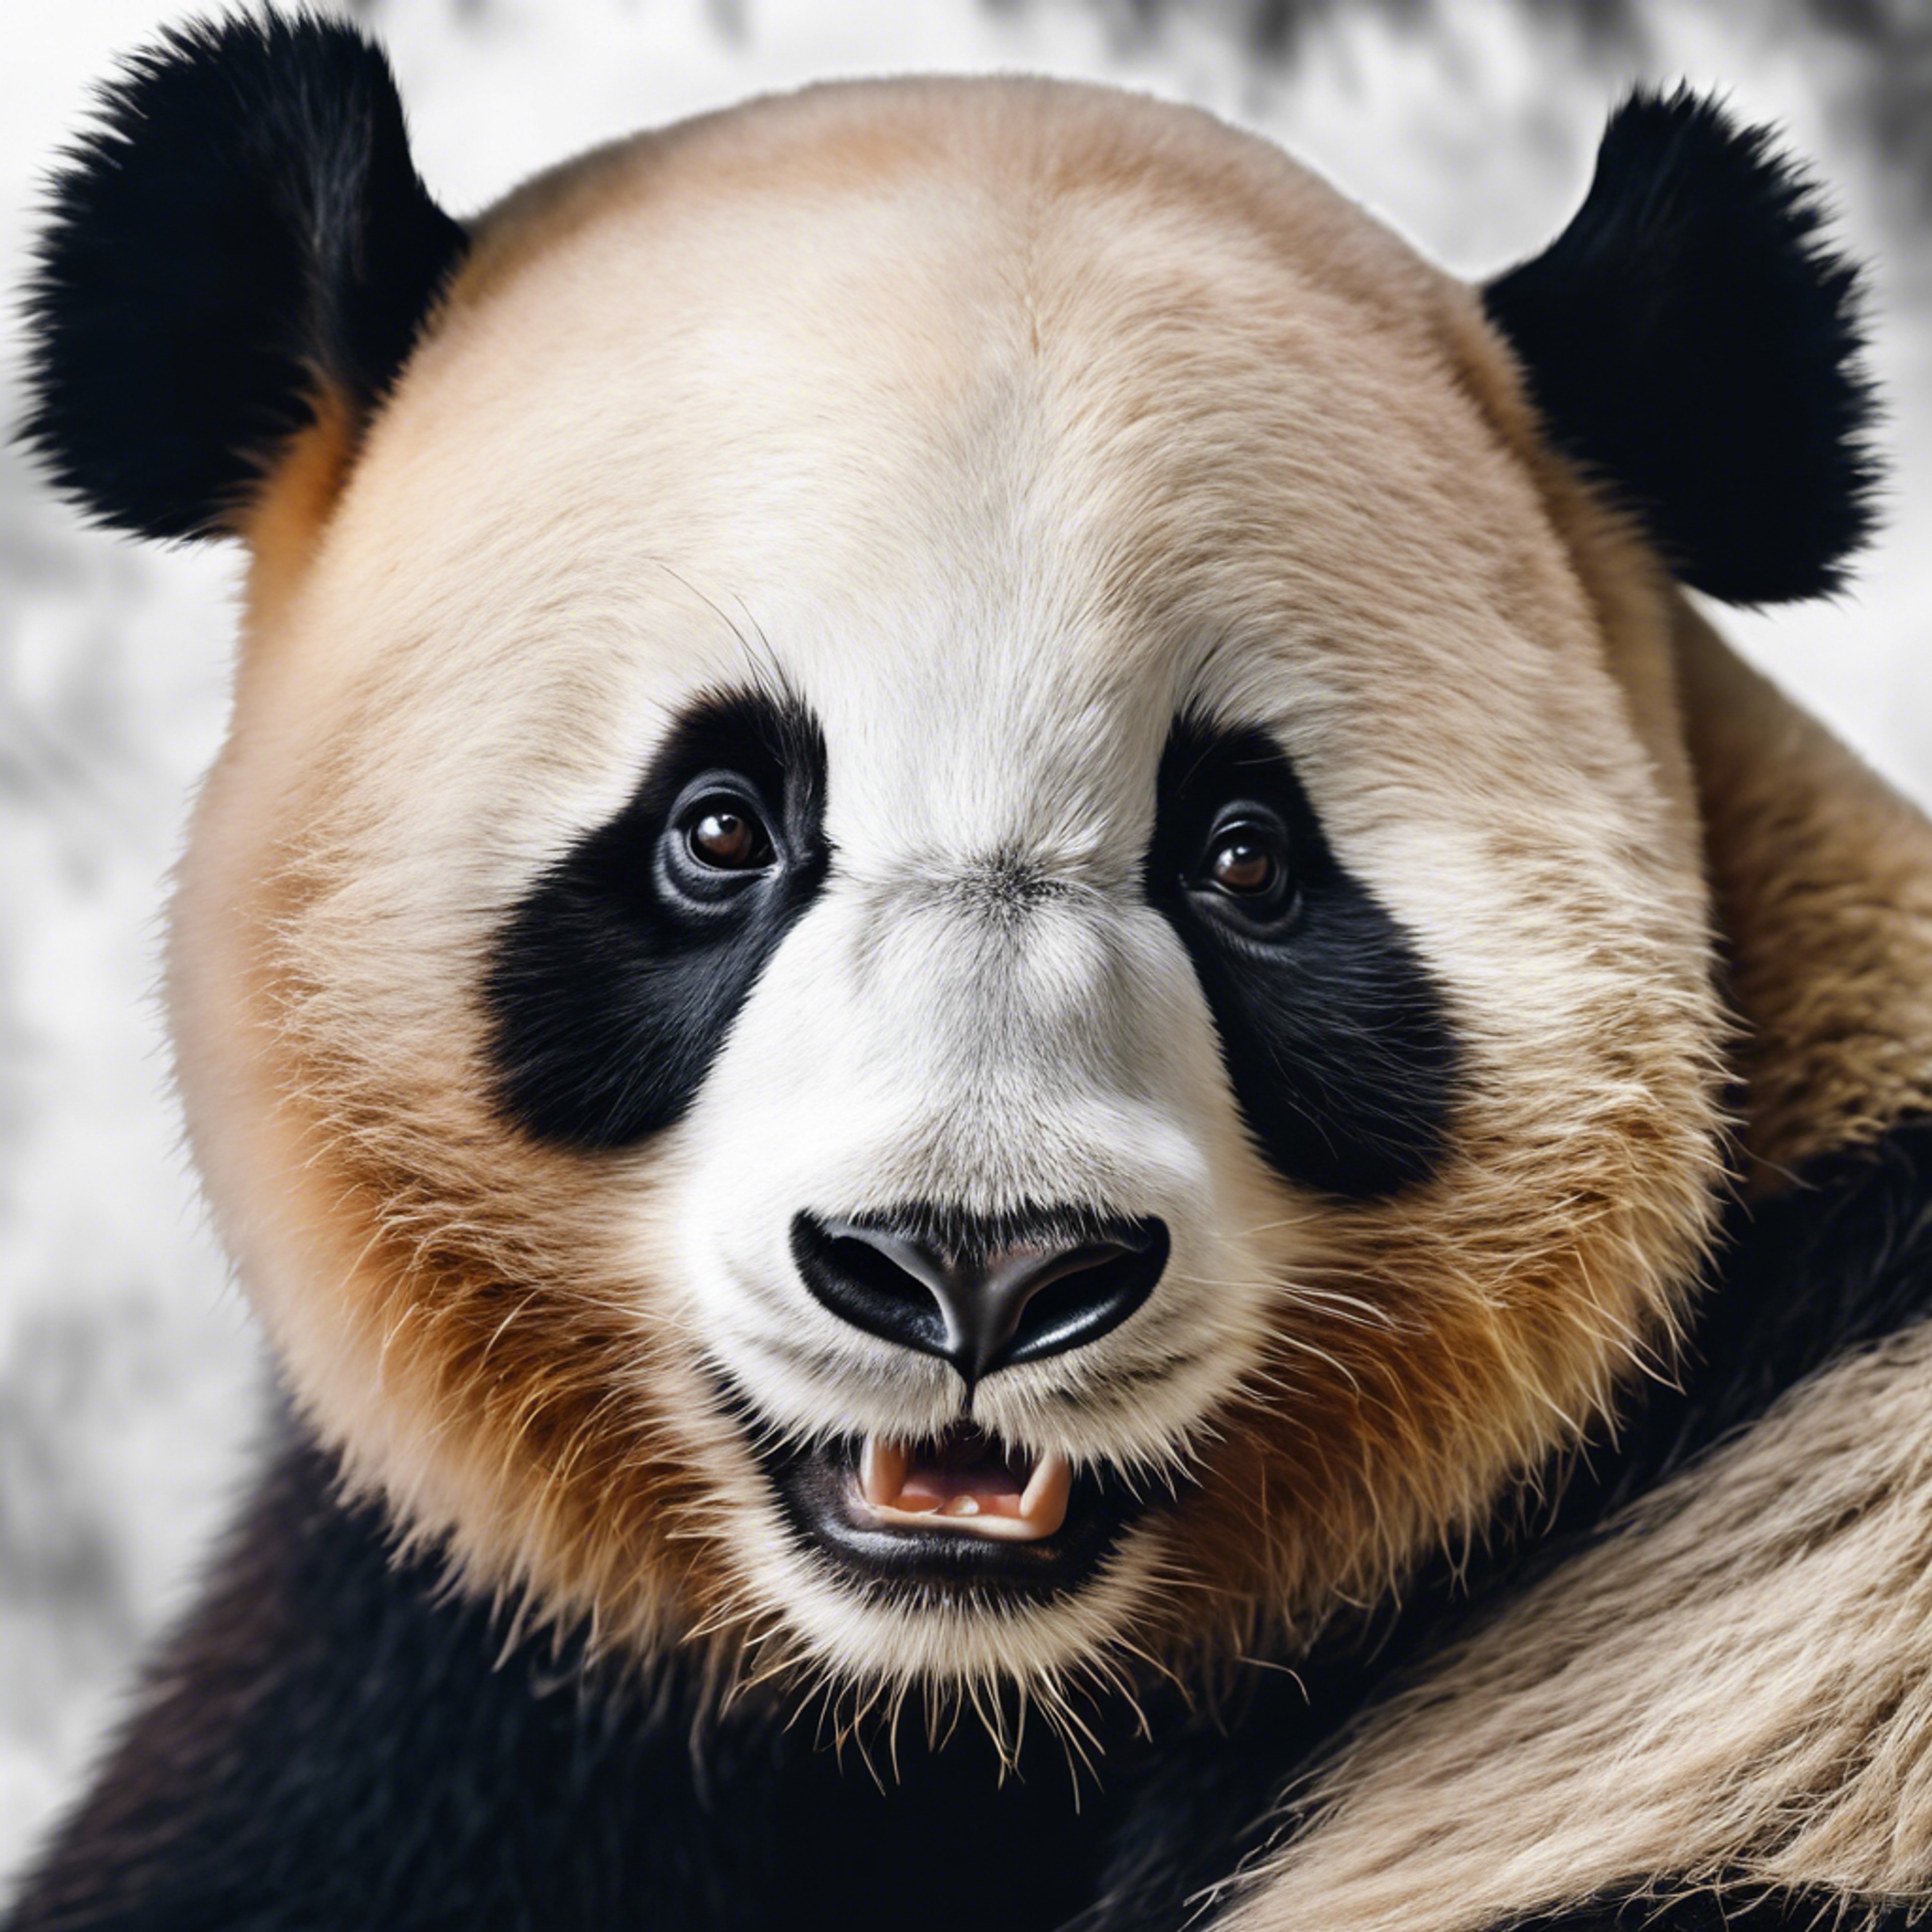 A close-up portrait of a smiling panda, showcasing the joy and charm of this magnificent creature. Обои[5b22781787714e61bfbc]